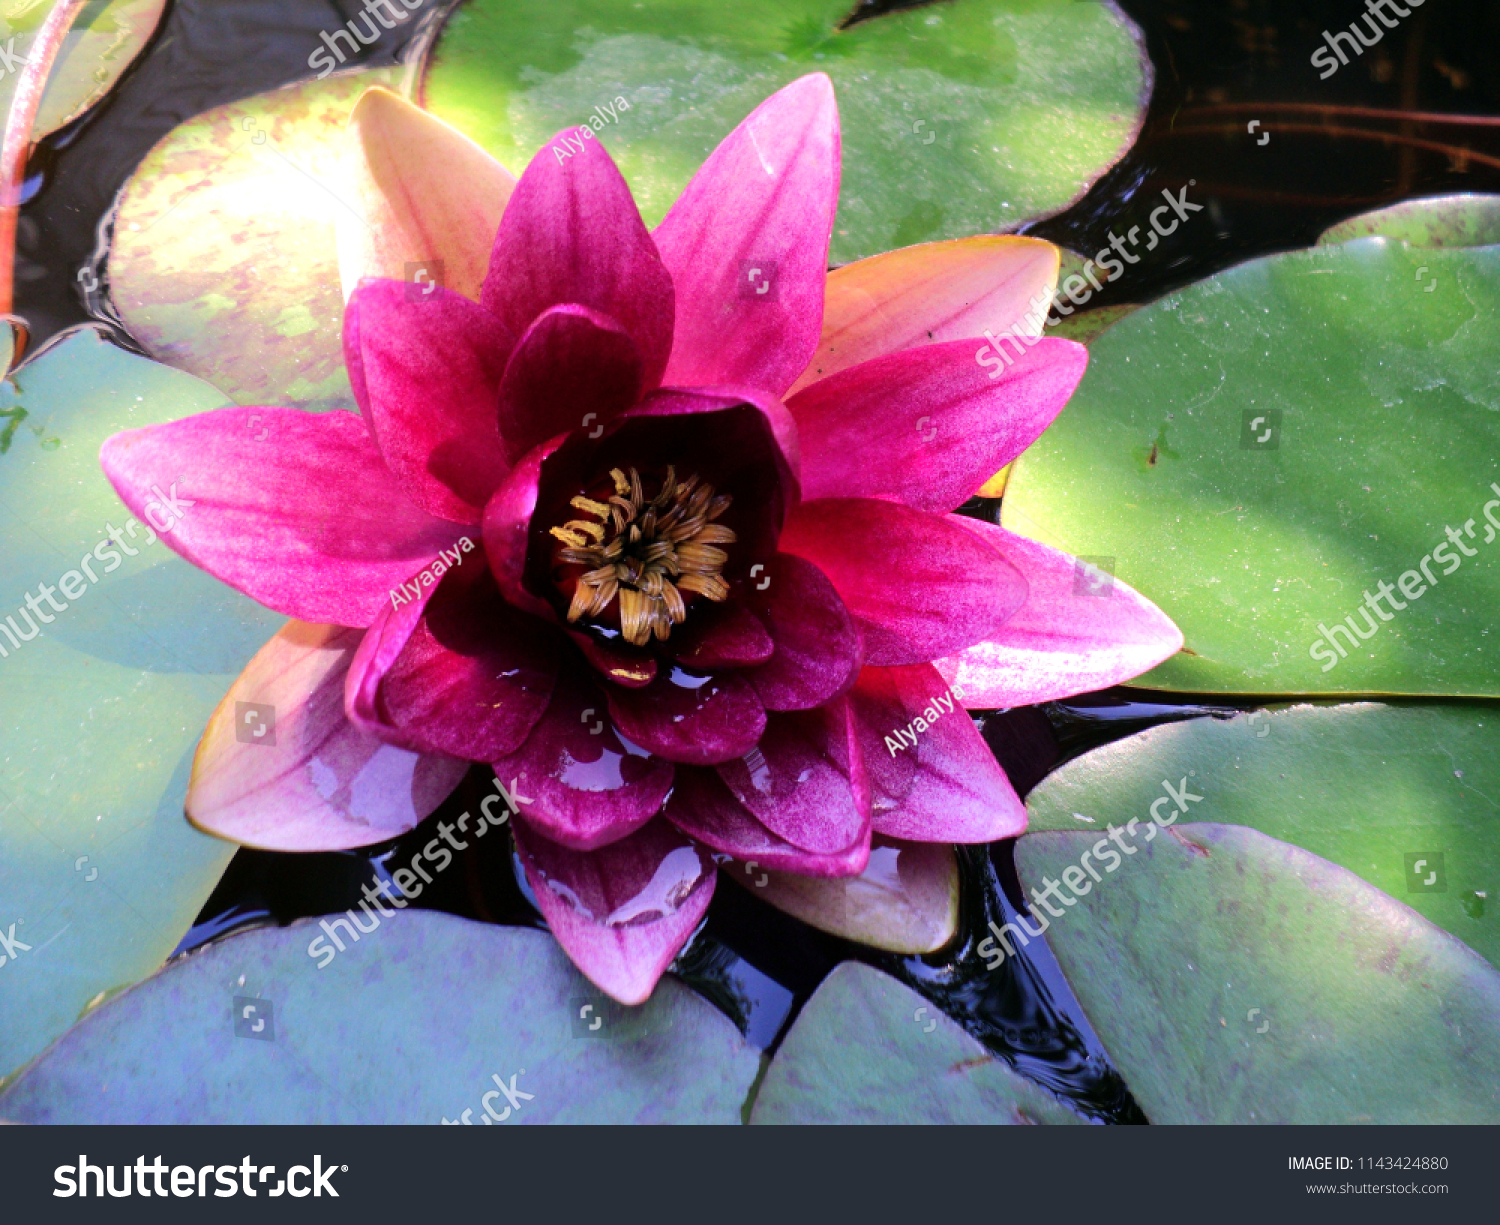 pink Lily blooms in the pond #1143424880